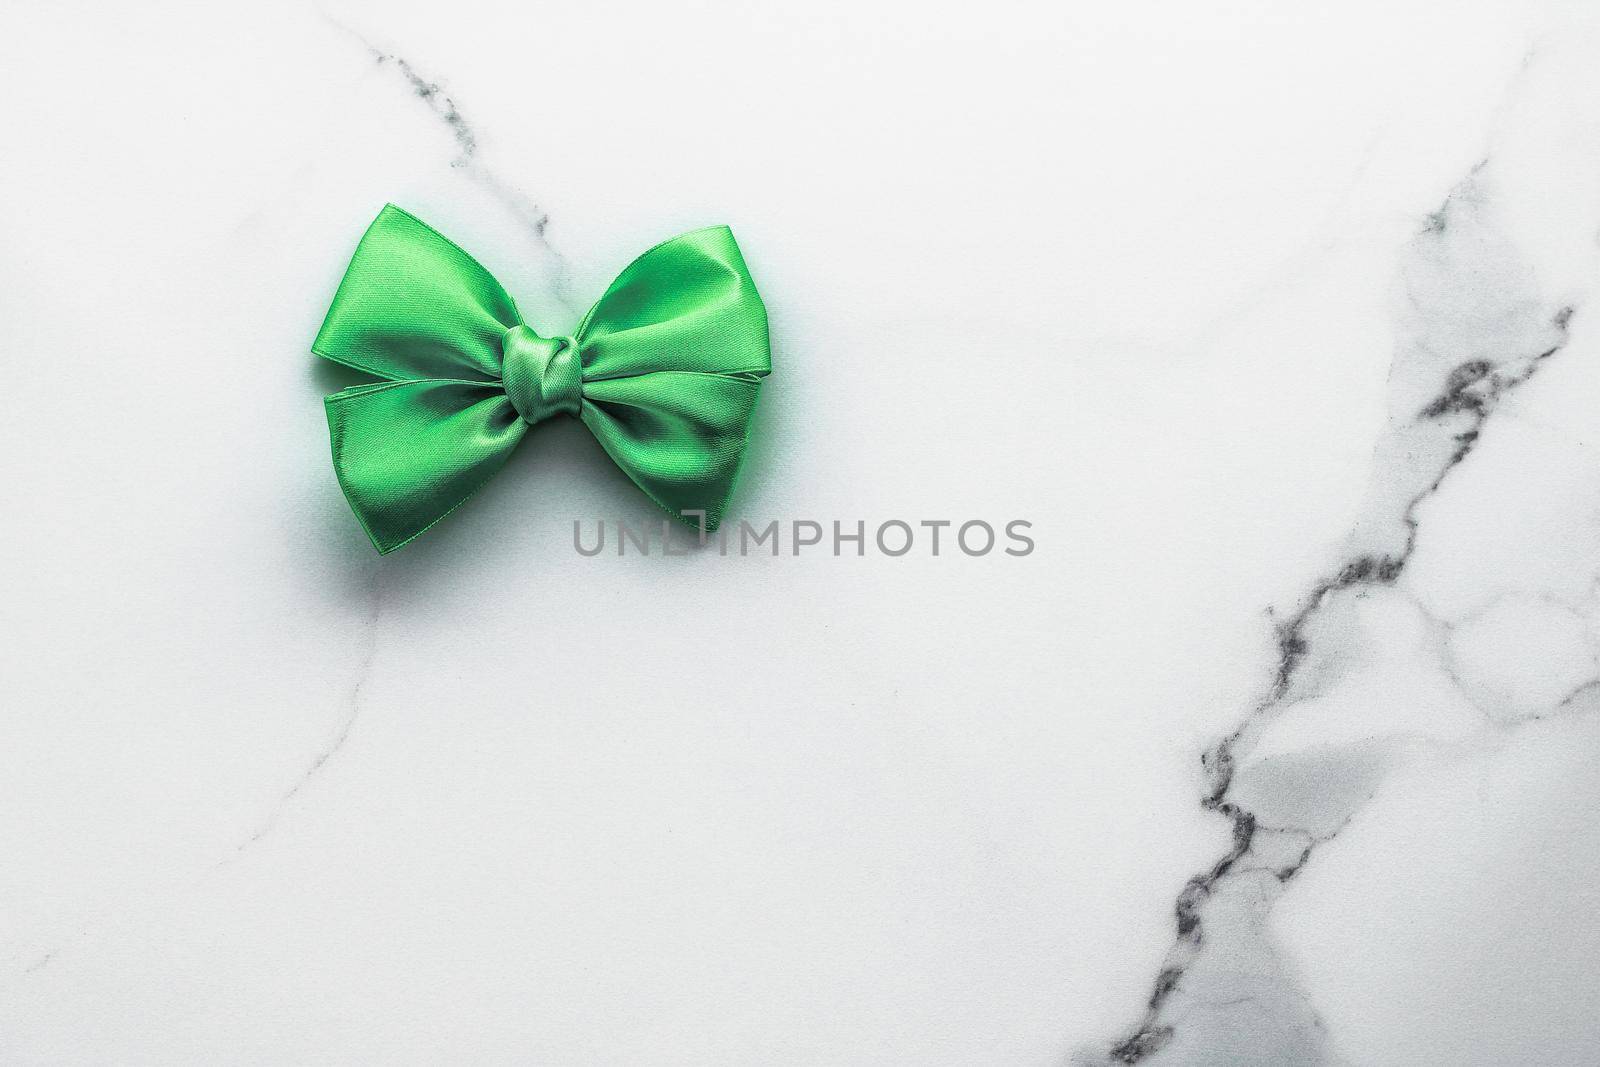 Decorative, birthday and art branding concept - Green silk ribbon and bow on marble background, St Patricks day present or Christmas glamour gift decor for luxury digital brand, holiday flatlay design